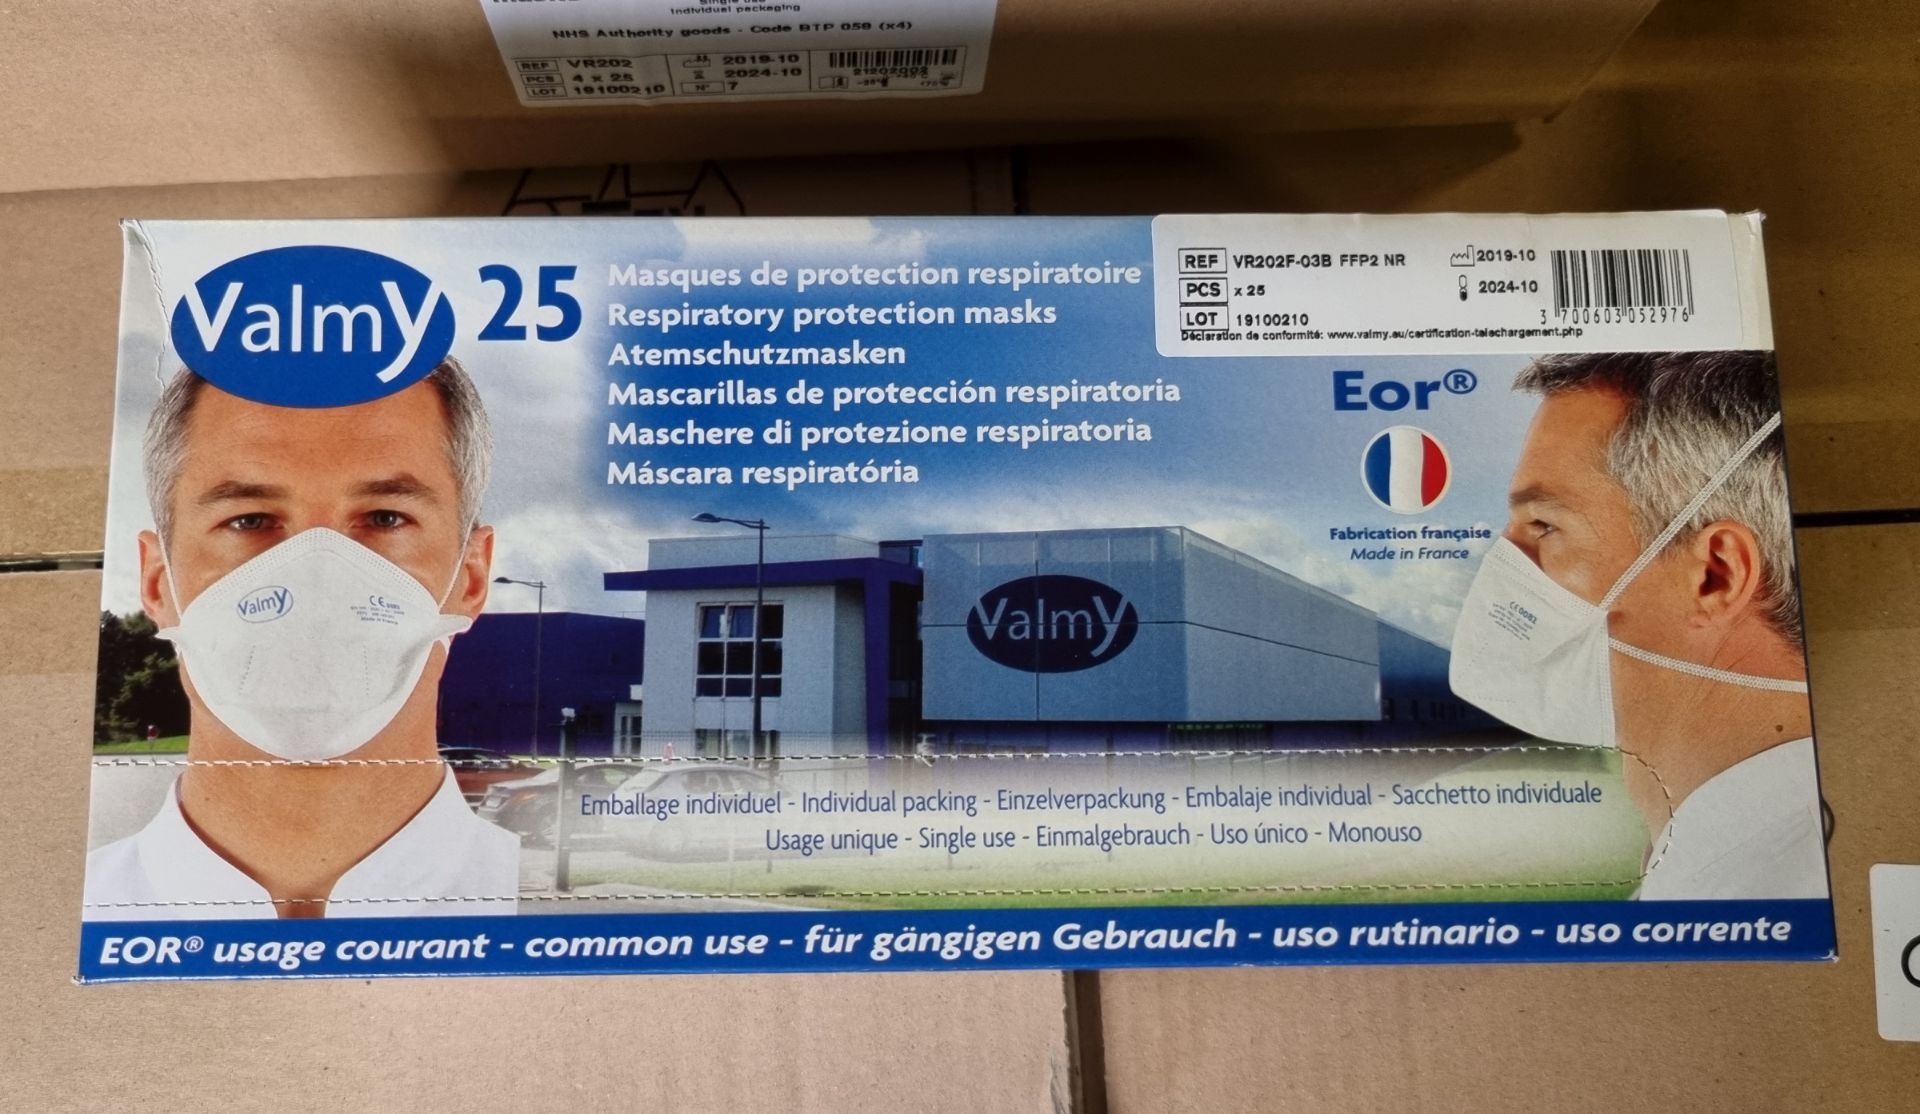 55x boxes of Blue FFP2 - respiratory protection masks - 4x packs of 25 masks per box - Image 4 of 6